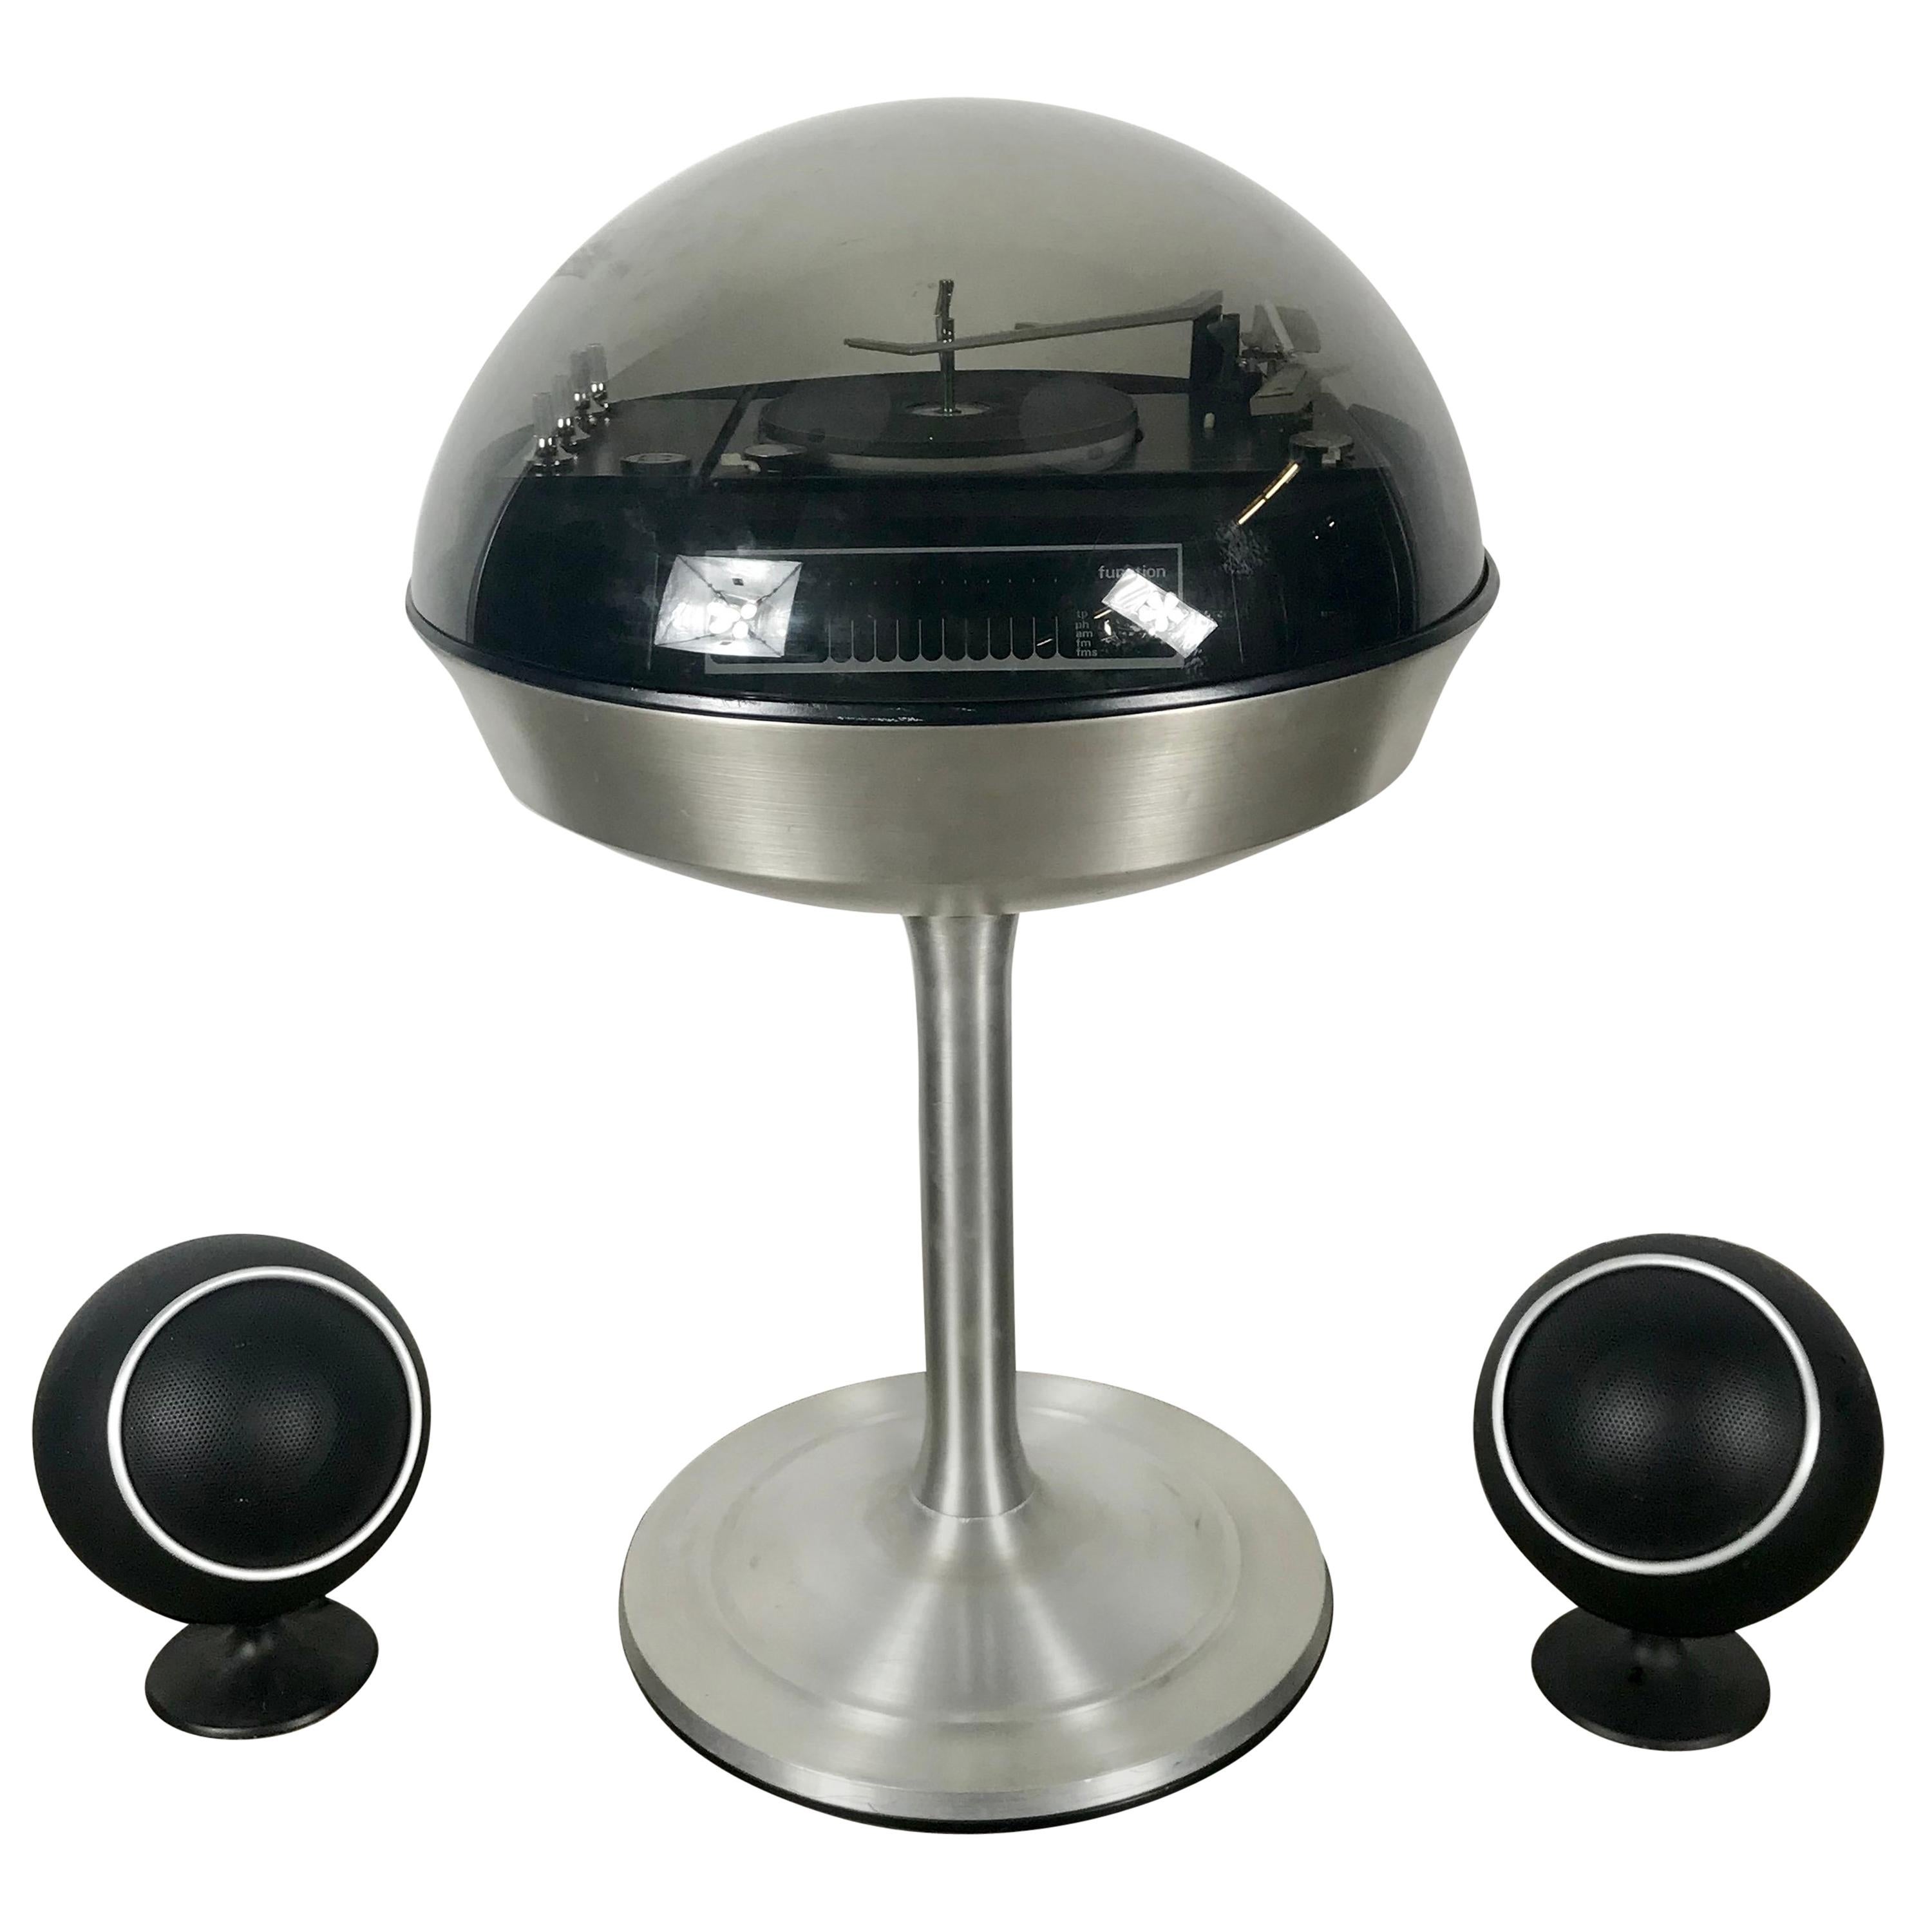 Modernist Space Age Bubble Top Apollo 860 Stereo/Record Player by Electrohome